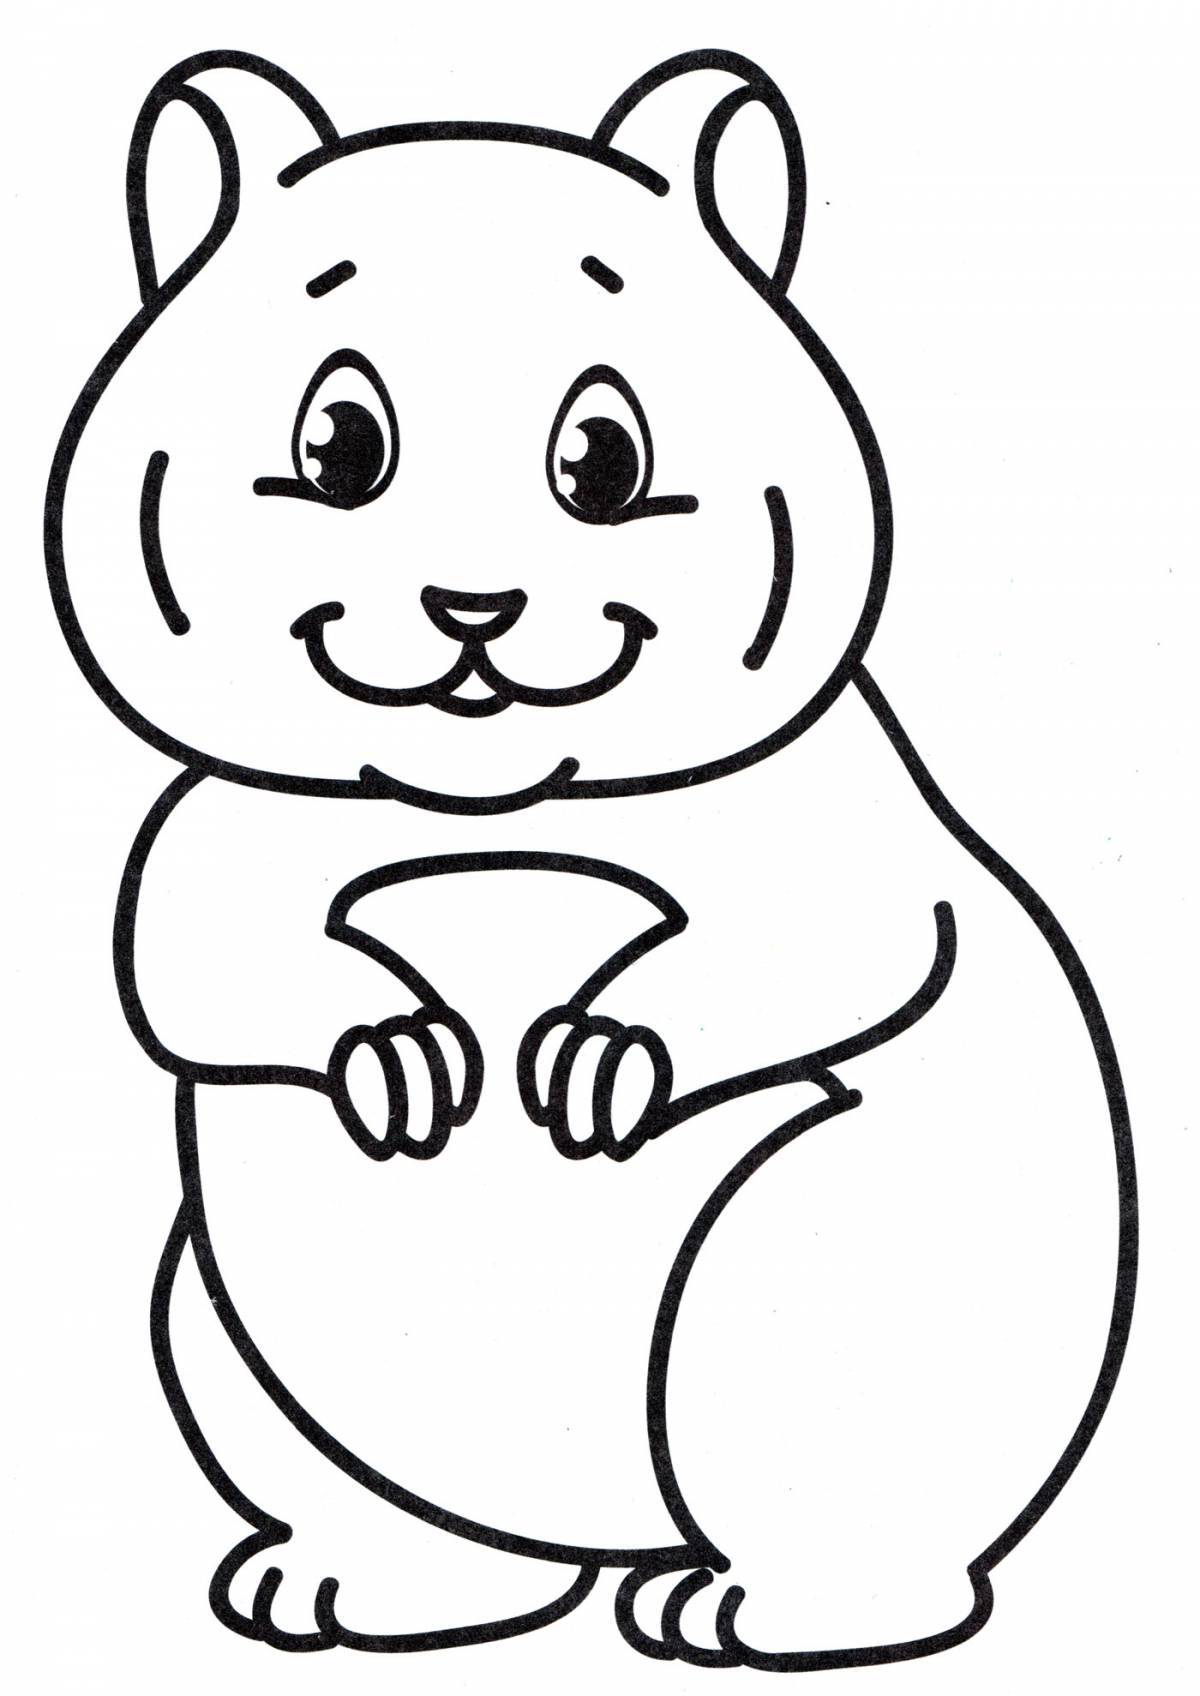 Live hamster coloring pages for kids